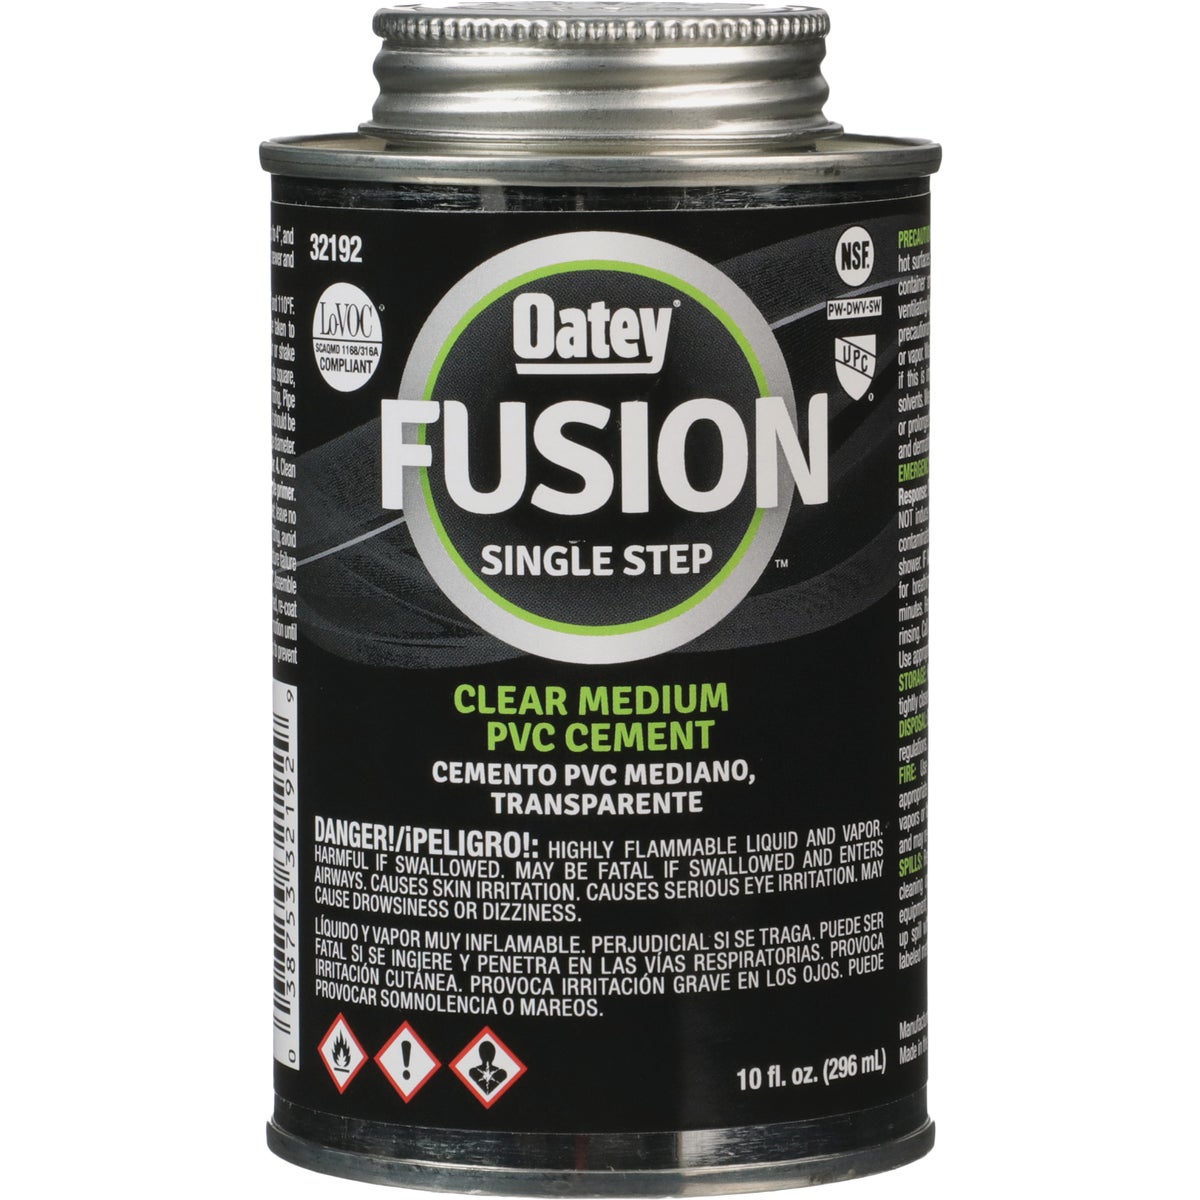 Item 404808, Oatey FUSION Single-Step Clear Self-Priming Medium Bodied PVC Cement is 